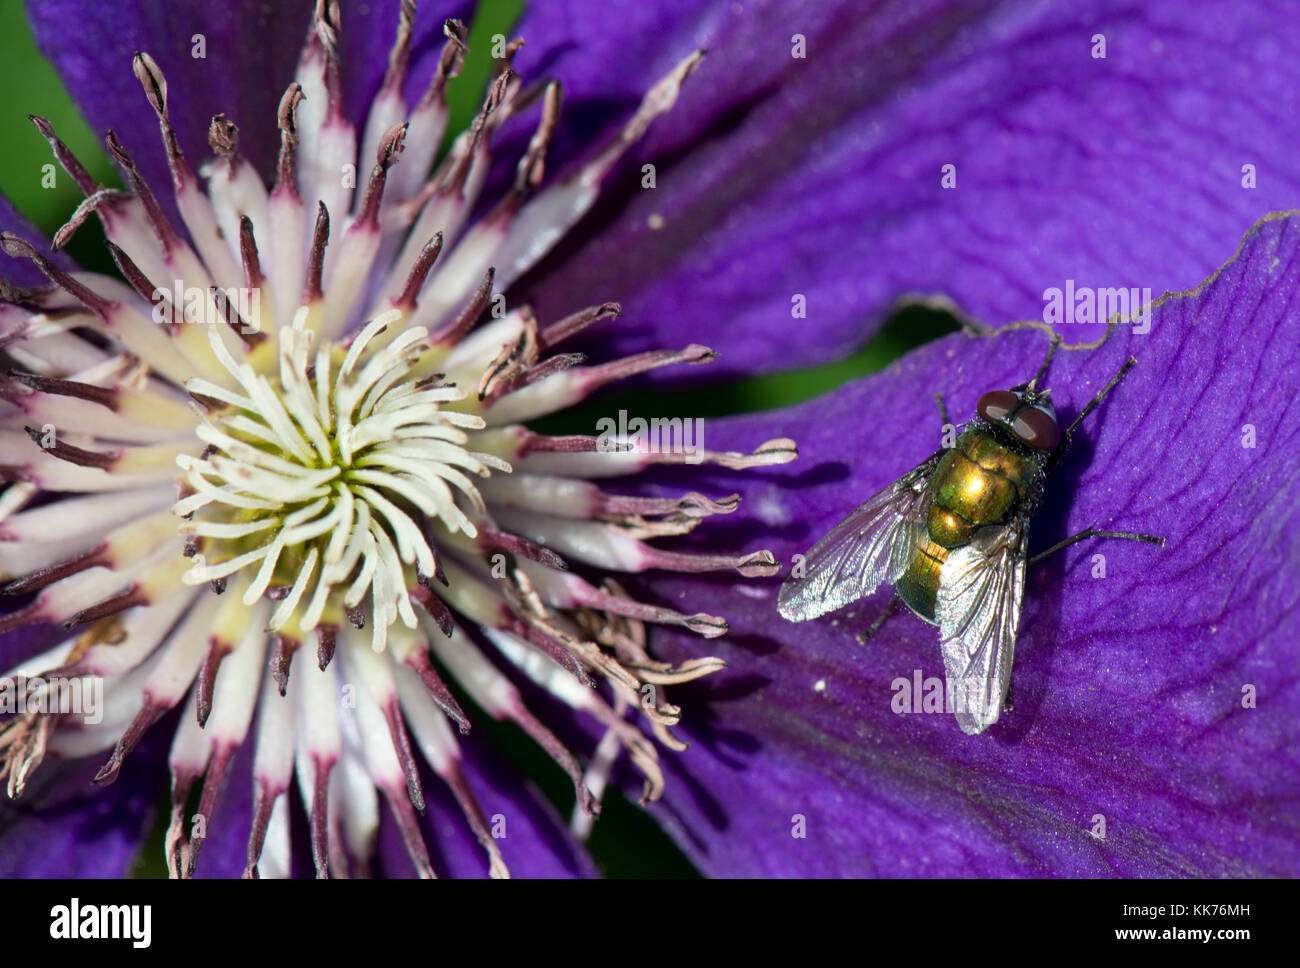 A greenbottle fly, Lucilia sp., on a blue Clematis flower in the sunshine, Berkshire, August Stock Photo